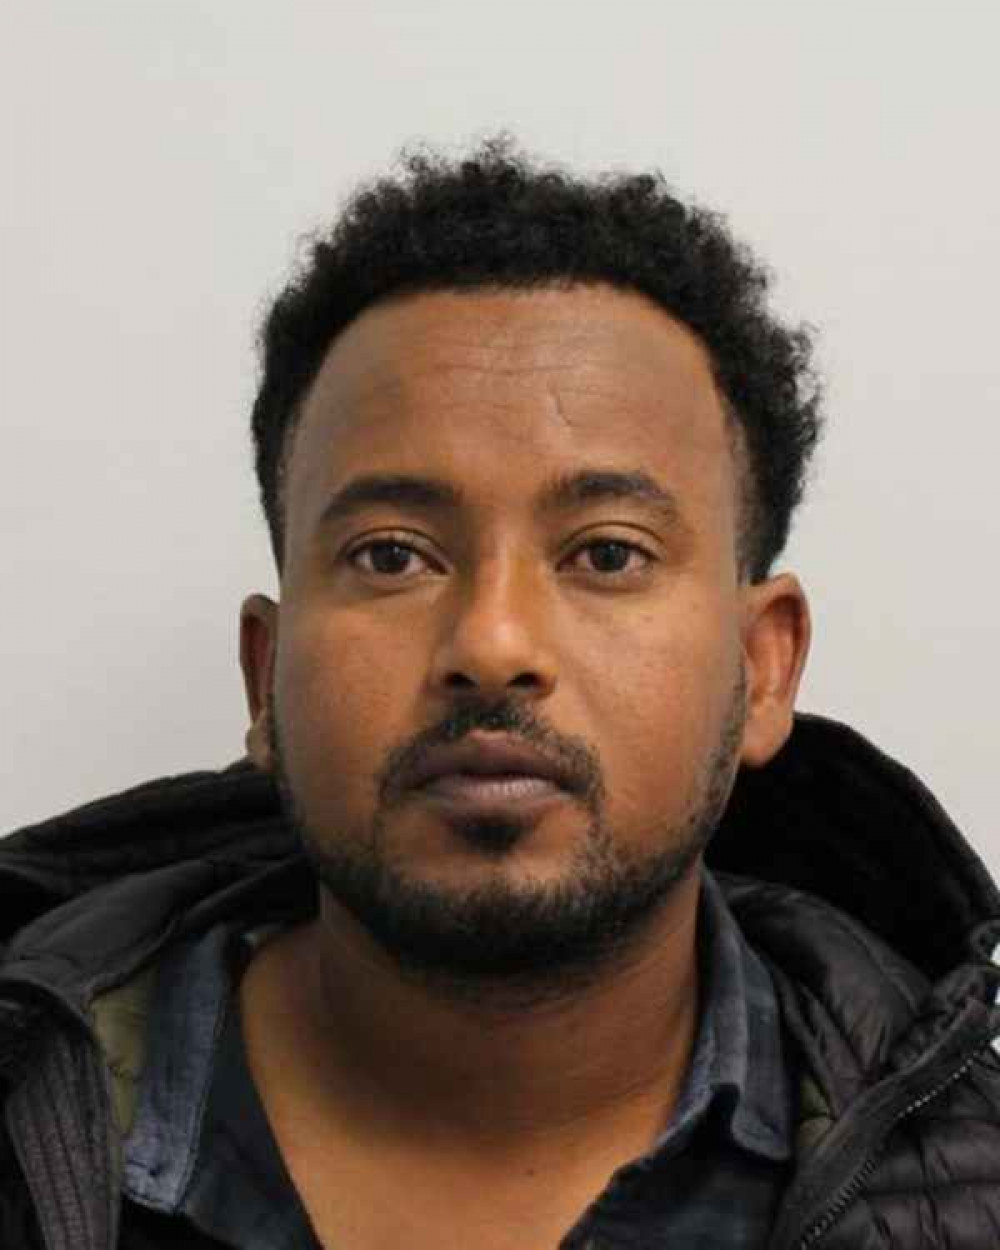 Romadan Adem was sentenced to 20 weeks' imprisonment, suspended for 18 months. Image Credit: Ealing Police